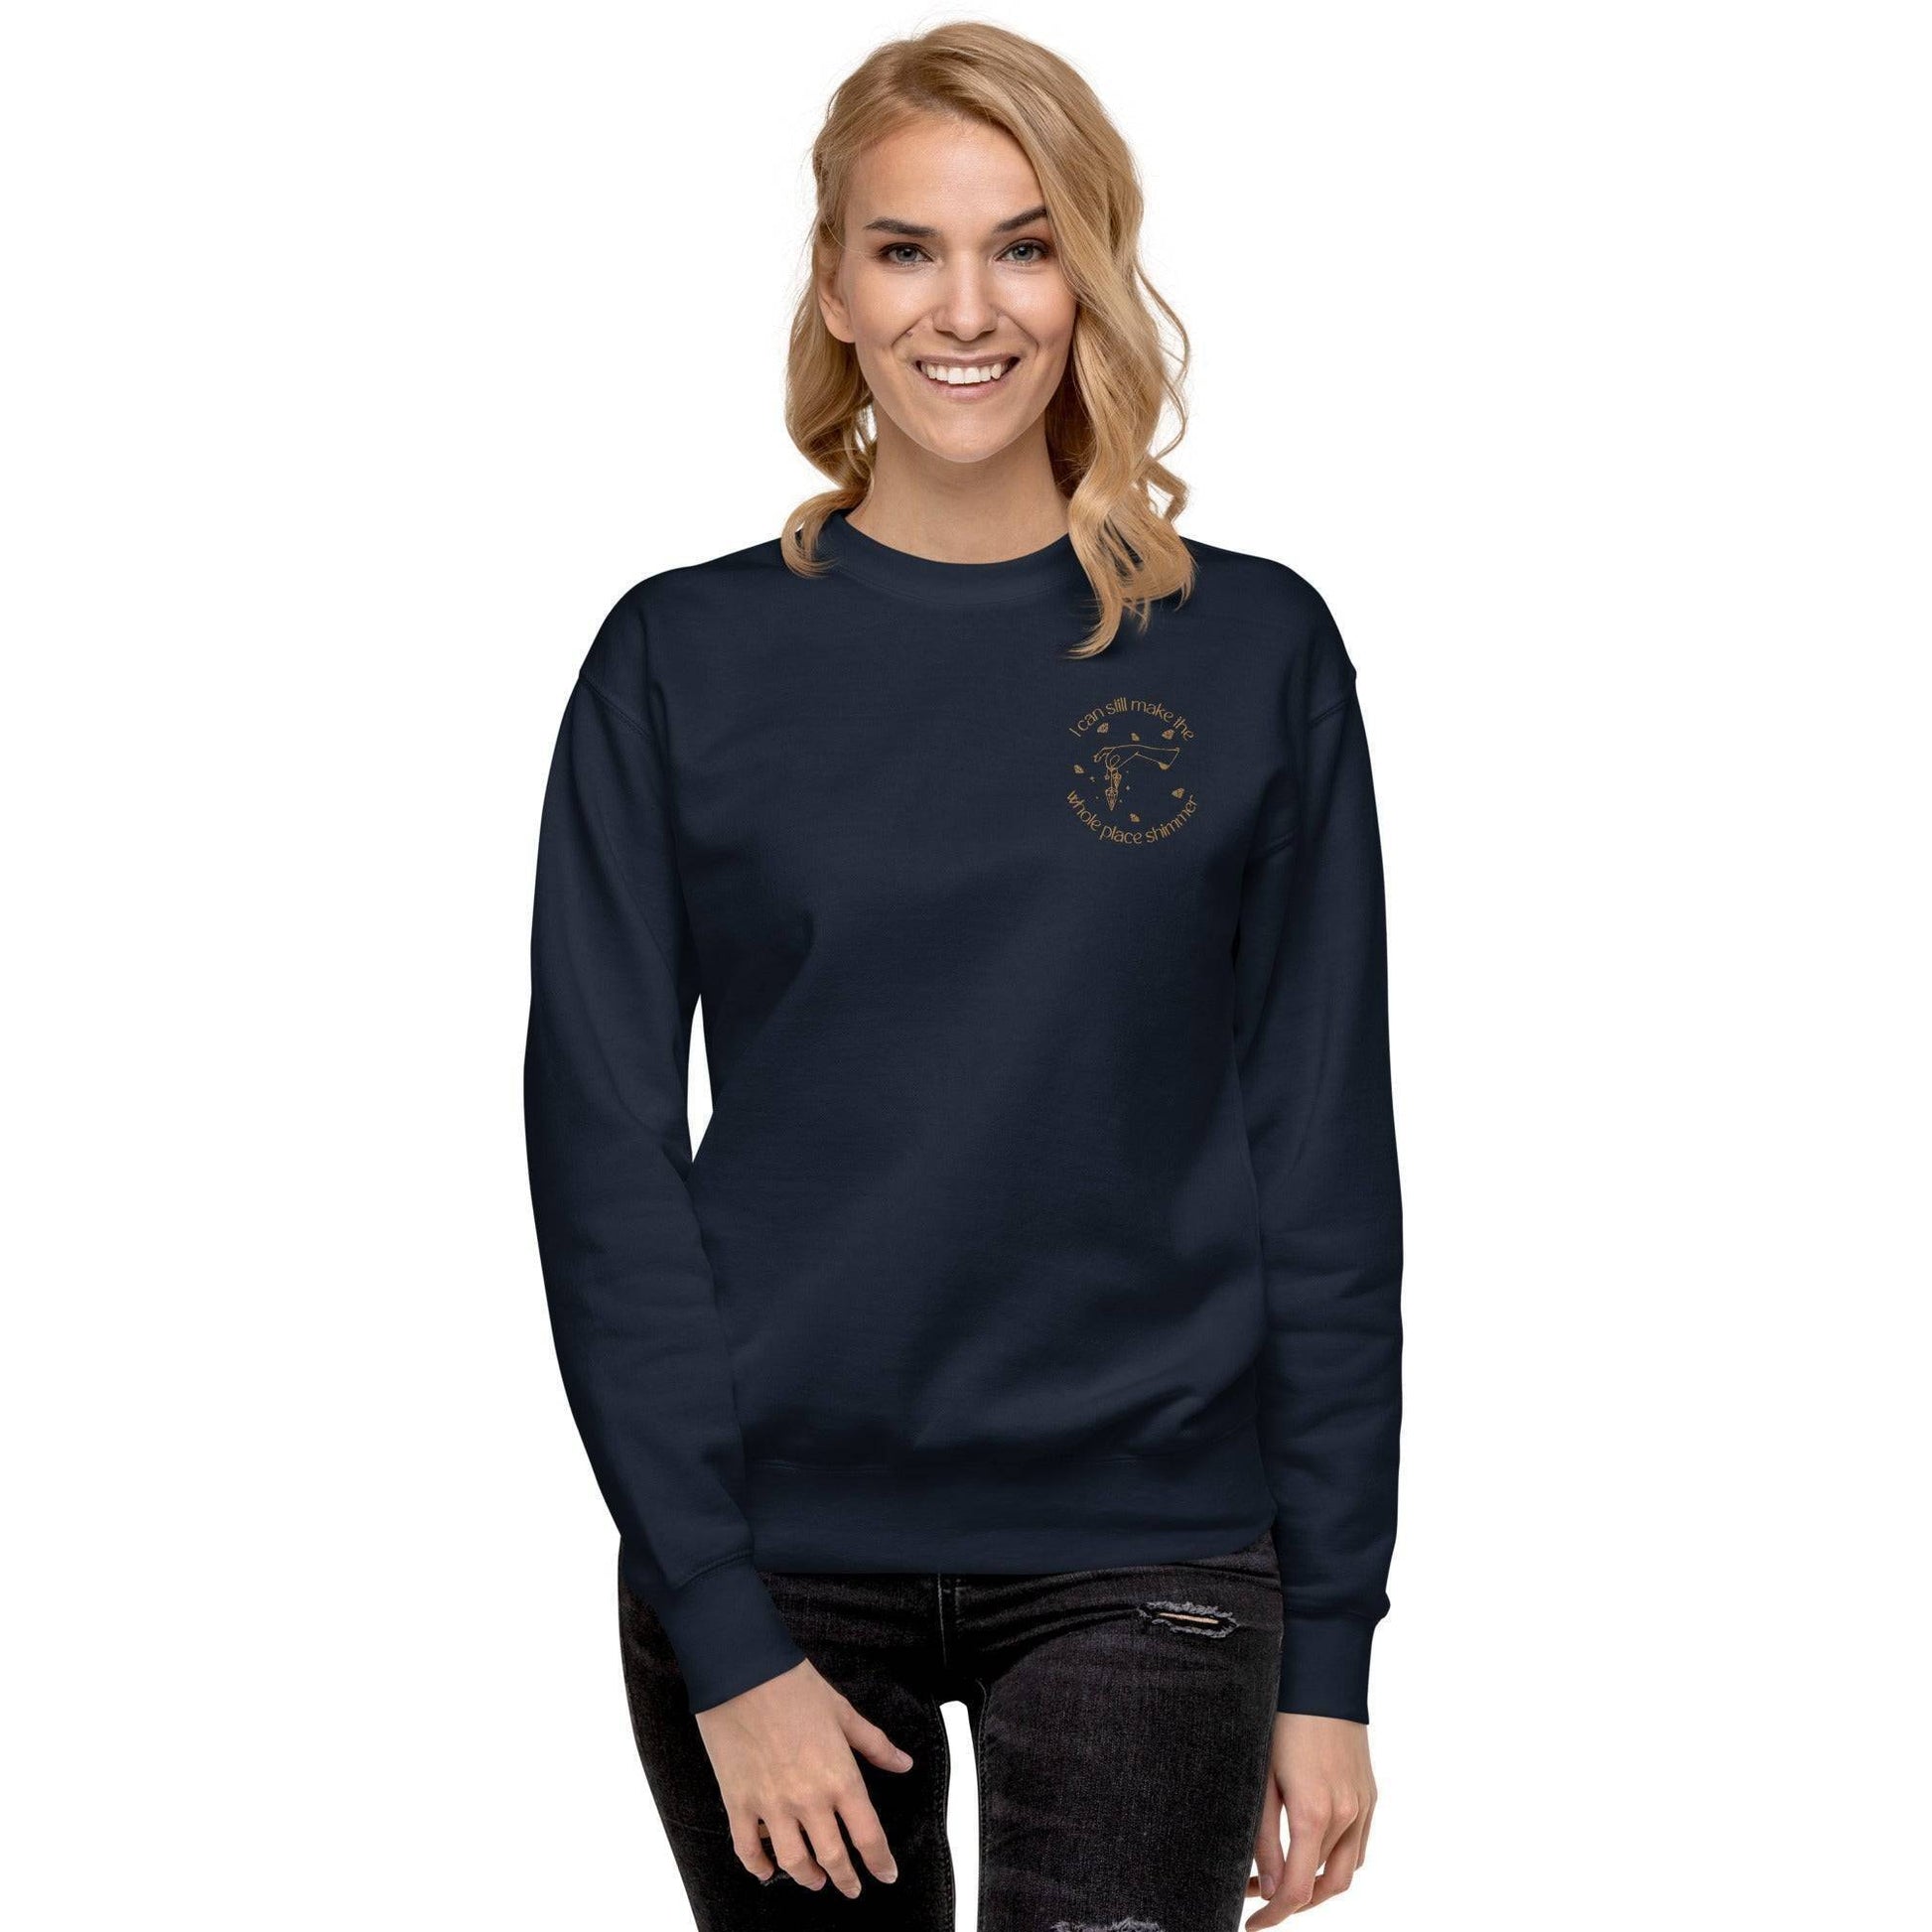 Taylor Swift Bejeweled Embroidered Sweatshirt